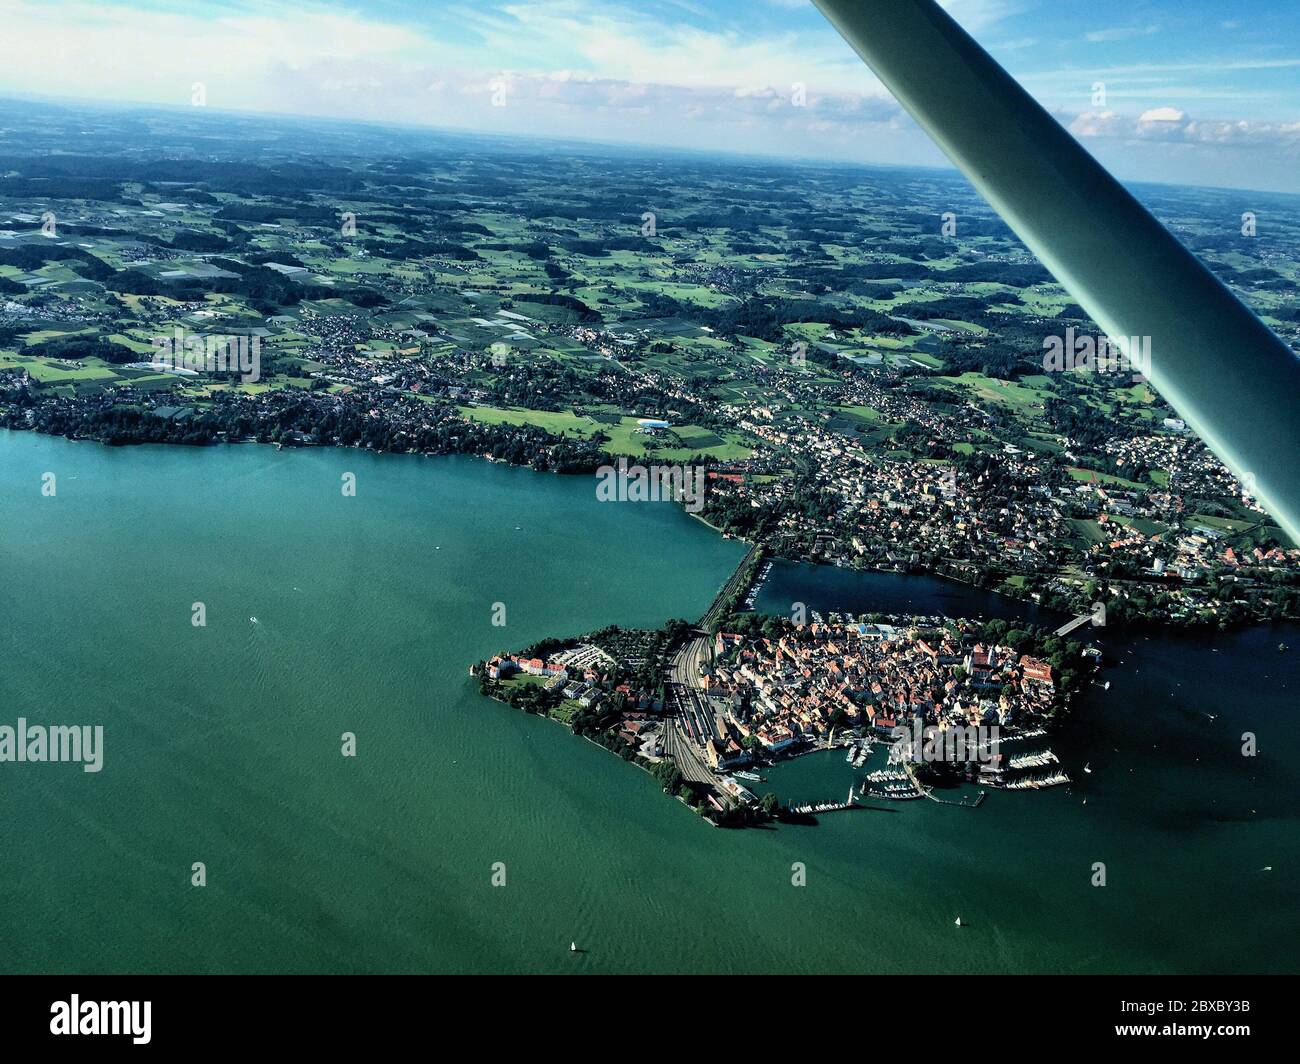 Lake of constance in Switzerland seen from above Stock Photo